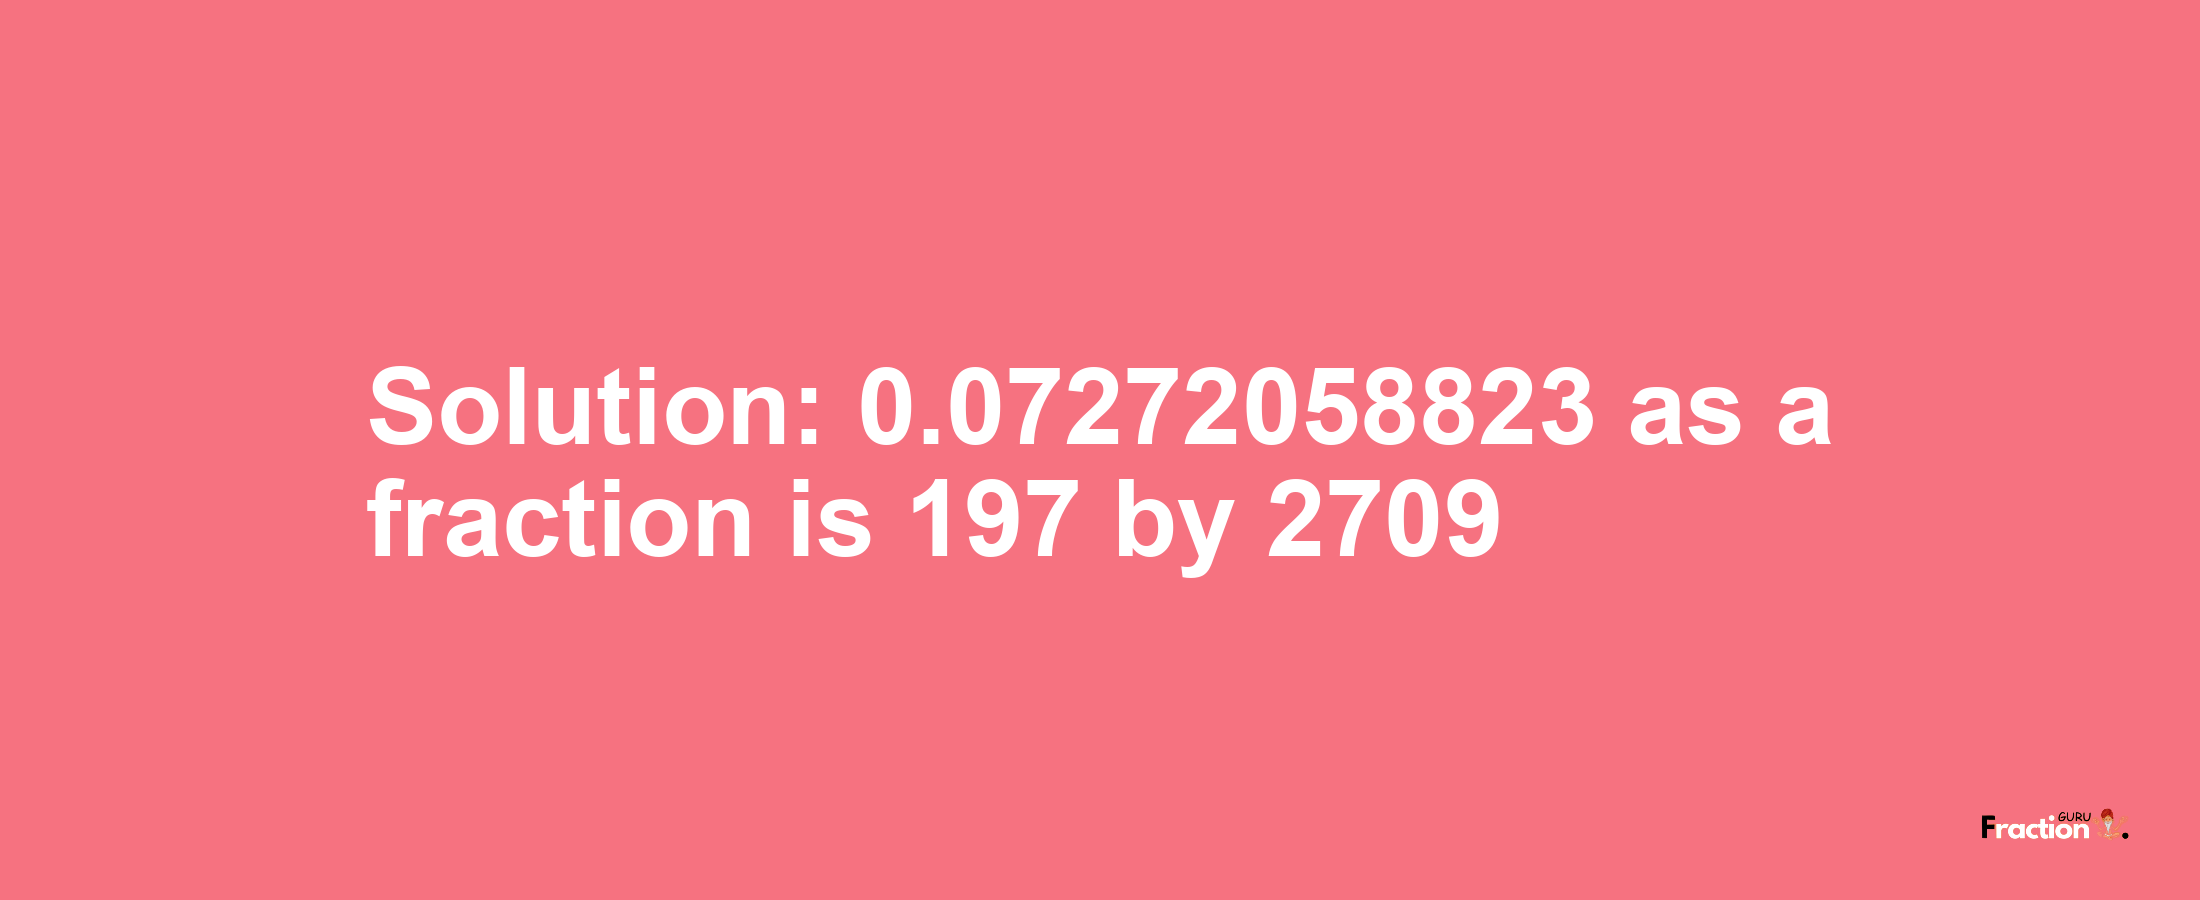 Solution:0.07272058823 as a fraction is 197/2709